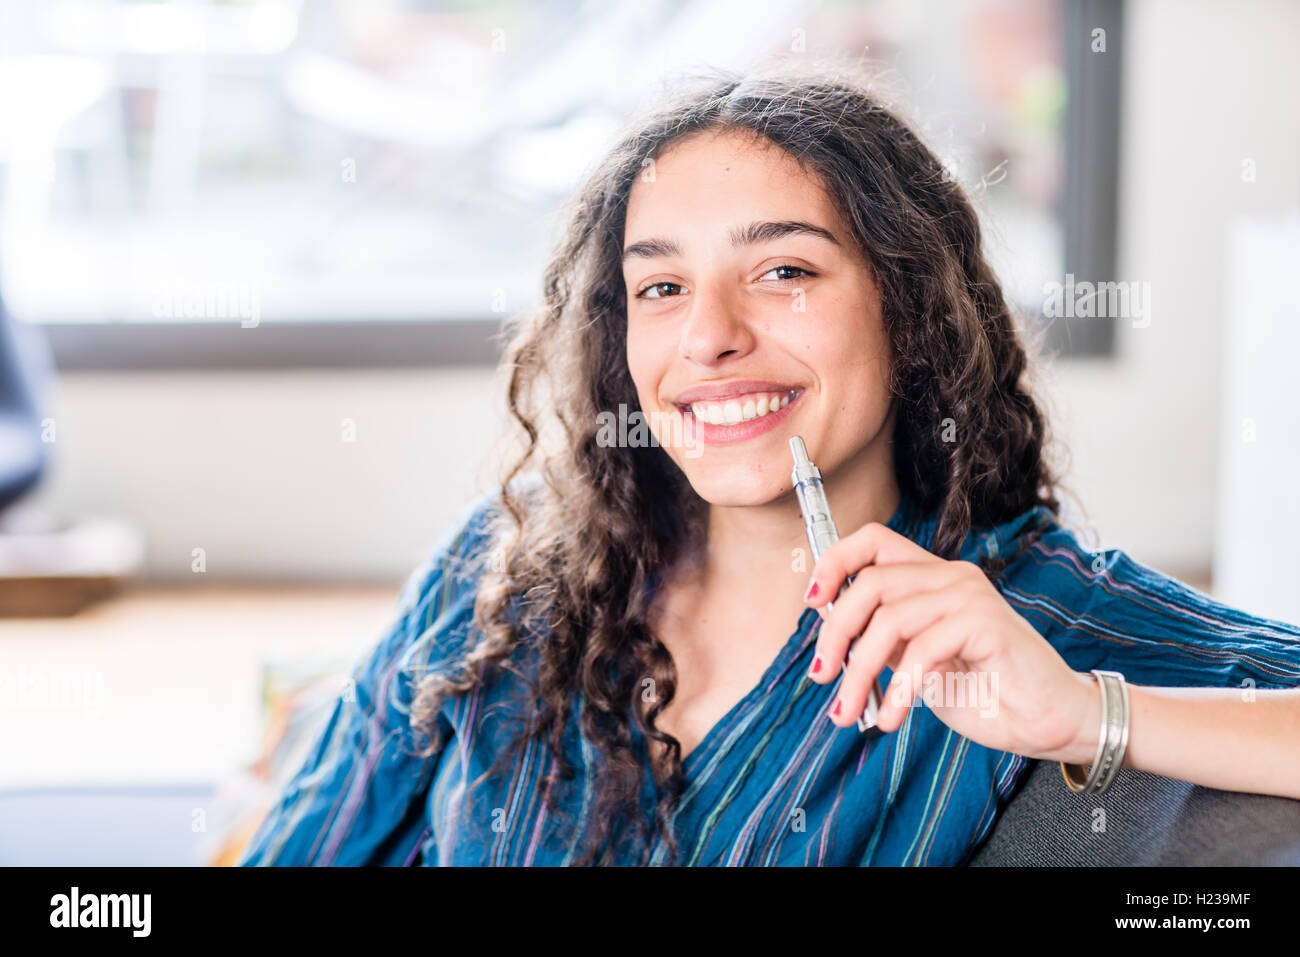 Teenage girl using electronic cigarette. Banque D'Images